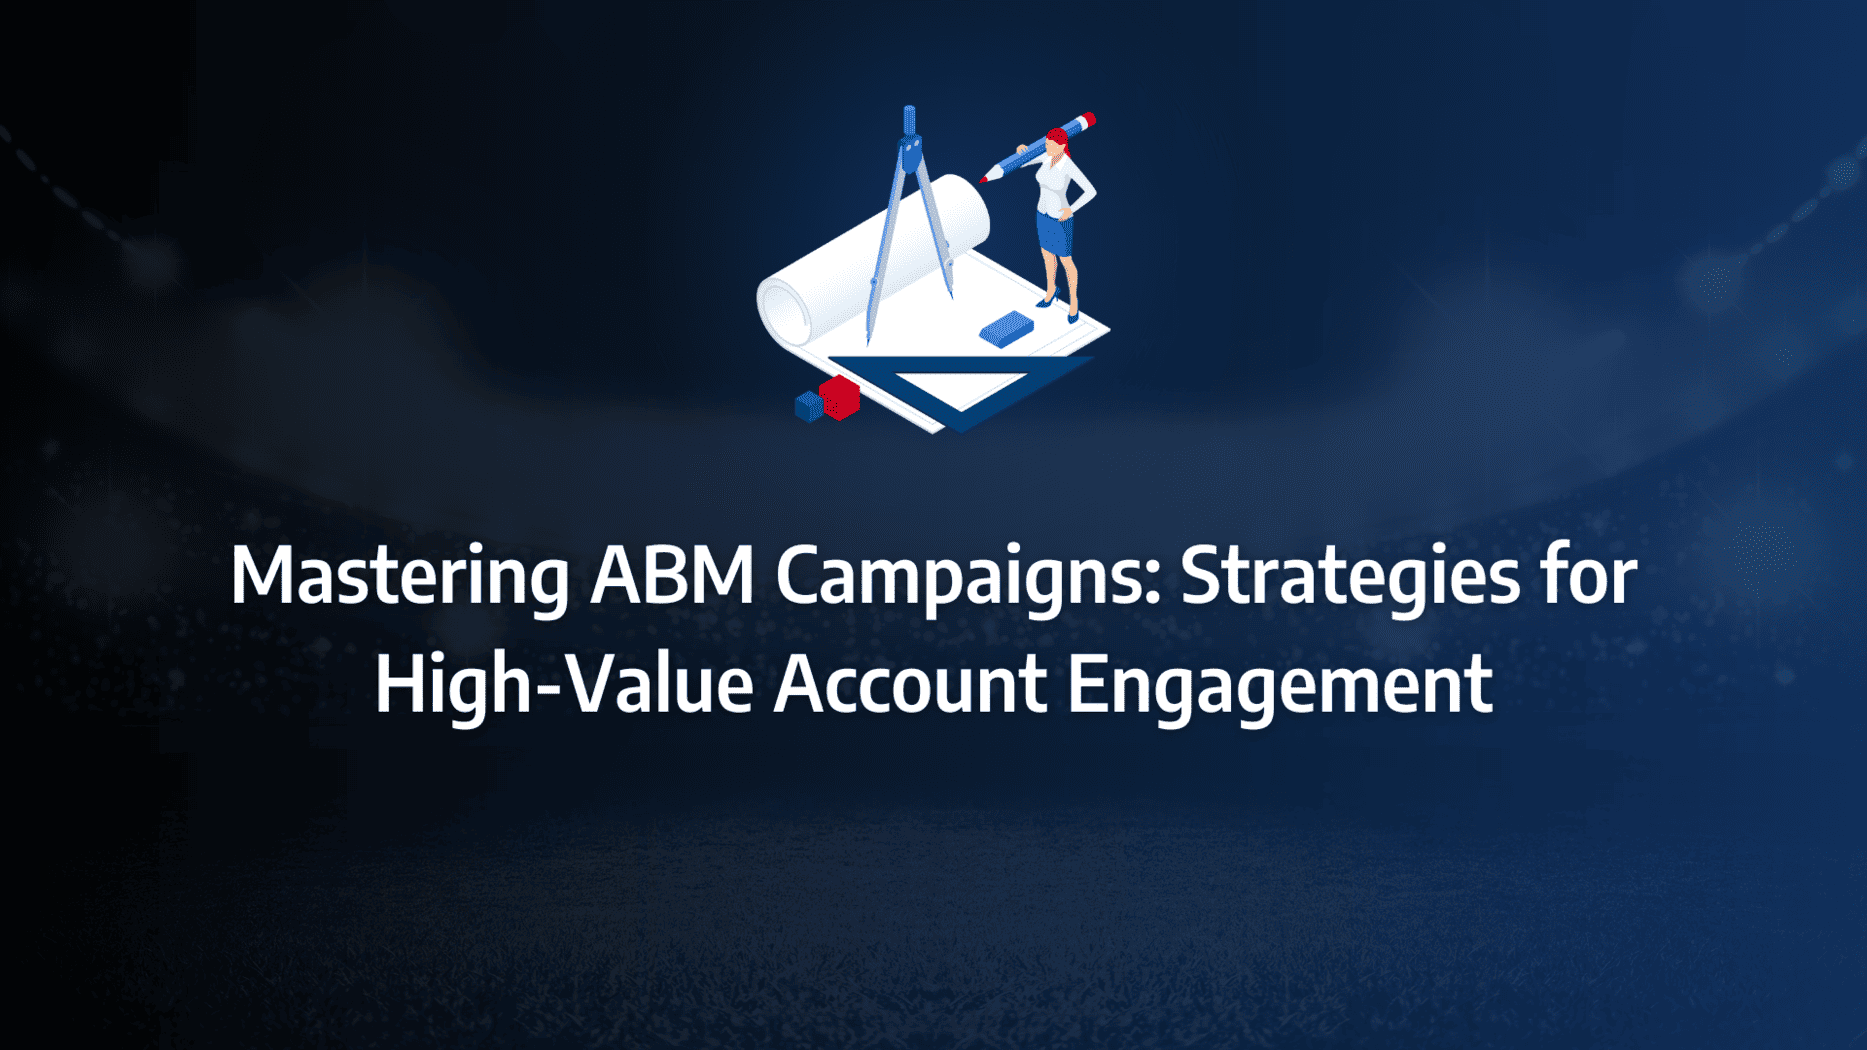 A complete guide to understanding and implementing an ABM Campaign for B2B SaaS: strategy framework diagram for abm campaign tactics, abm campaign ideas, types of abm campaigns, successful abm campaigns